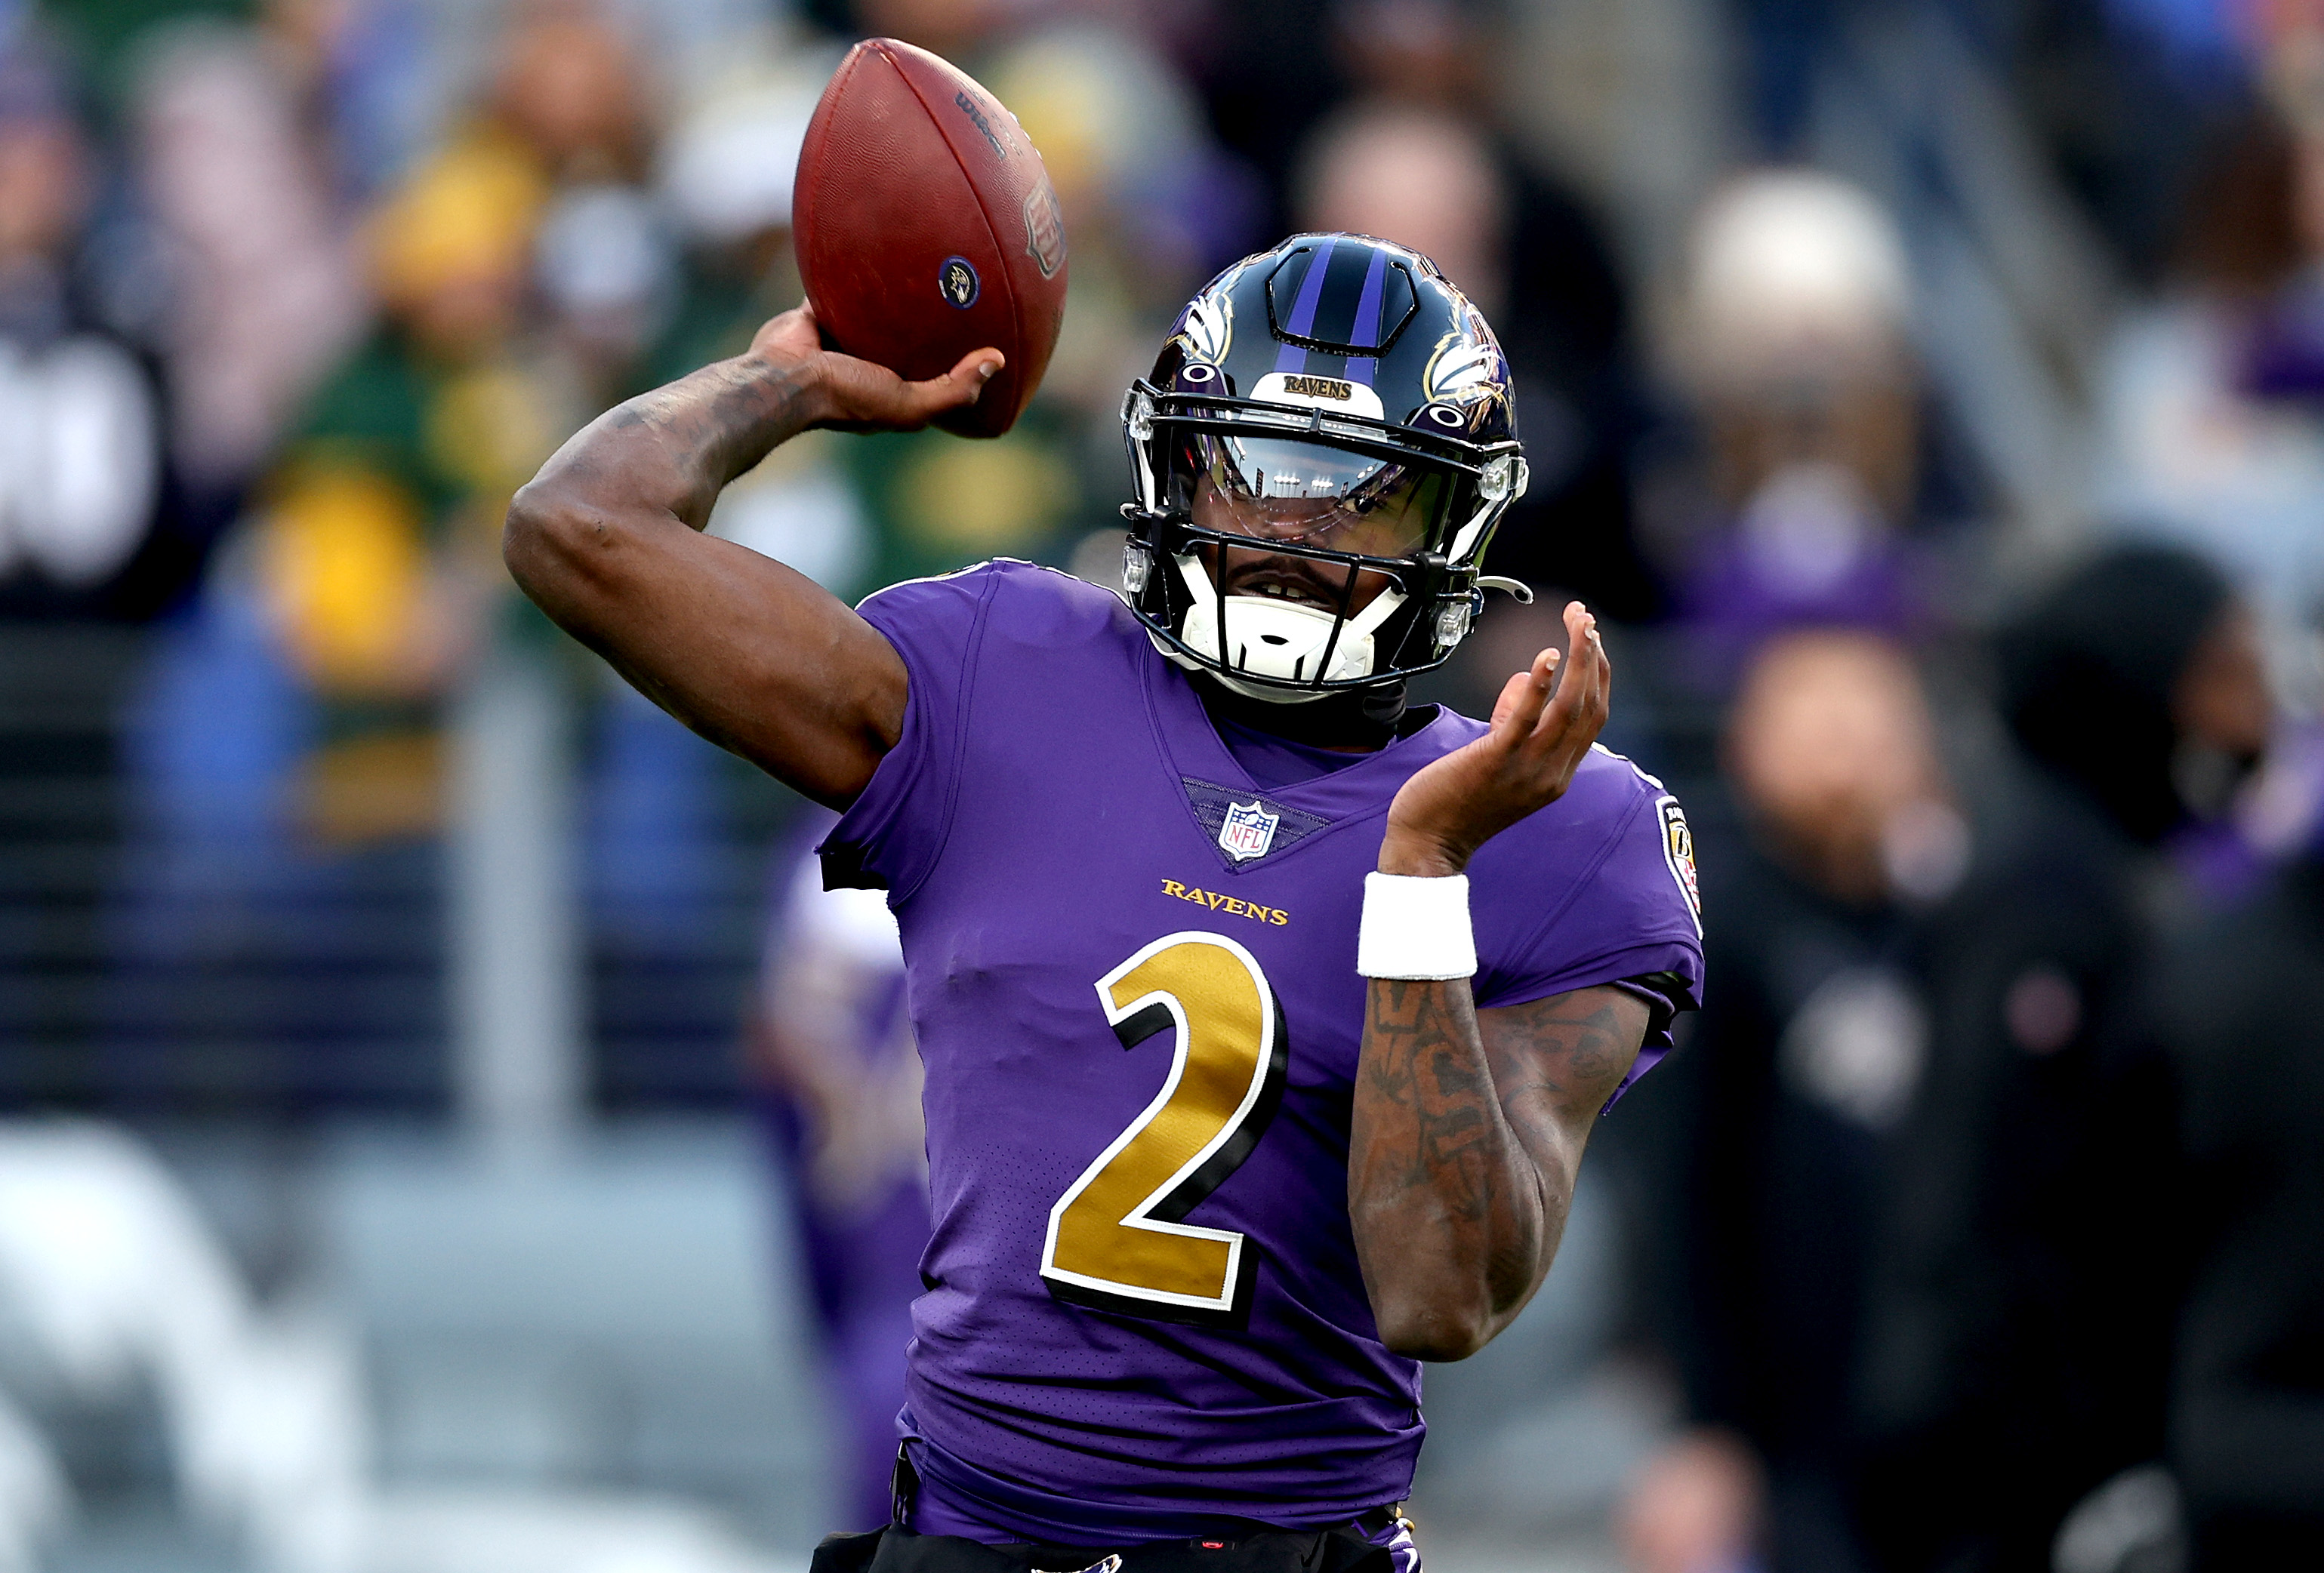 Ravens QB Tyler Huntley warms up before game against the Packers